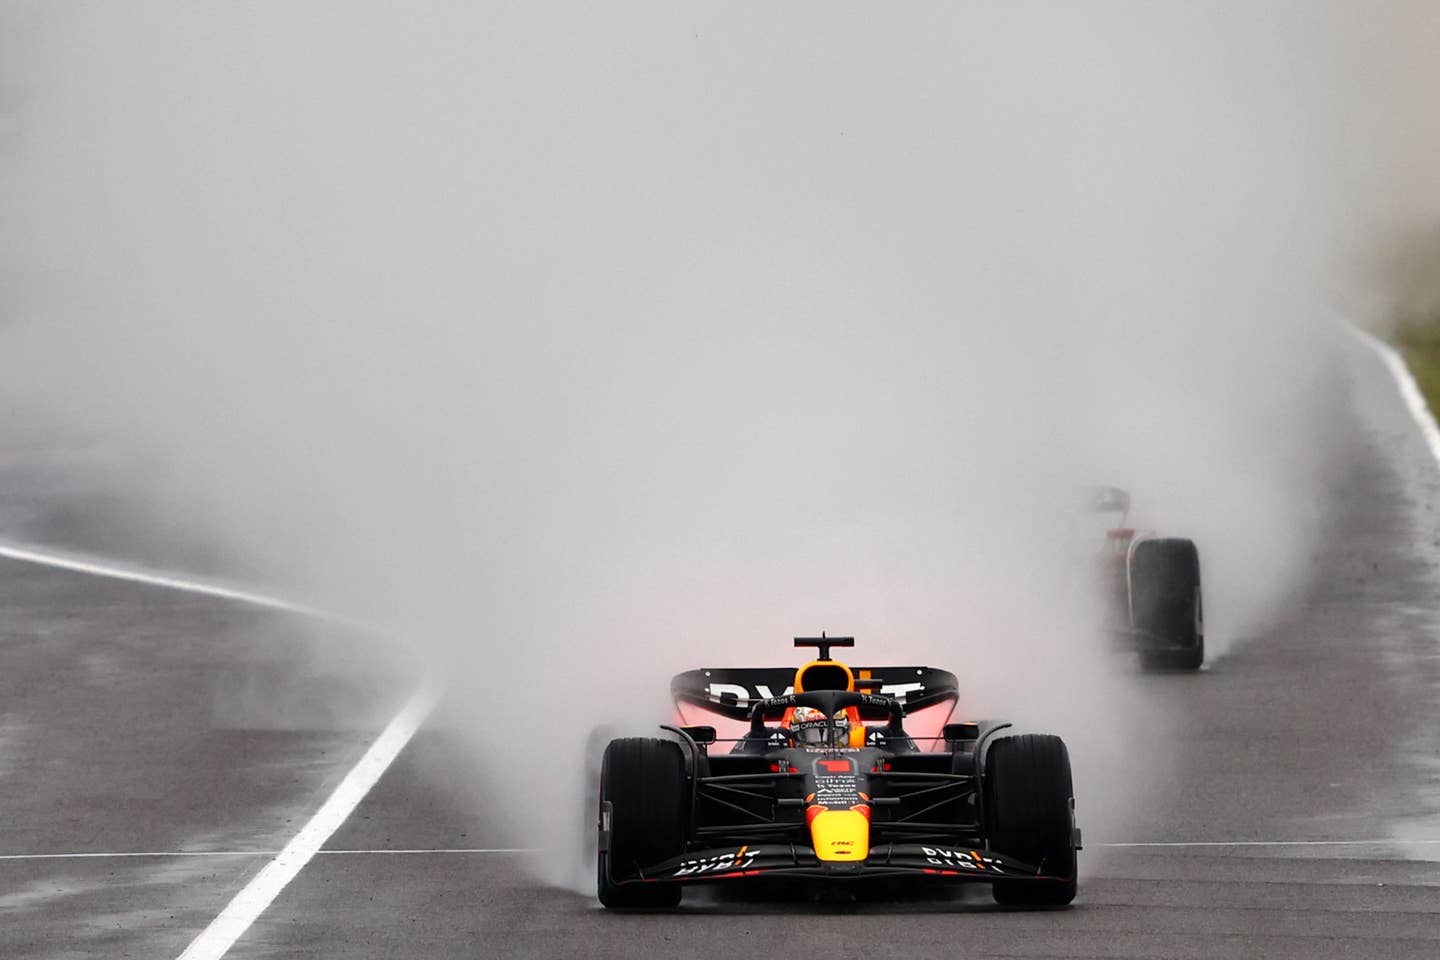 The visibility at Suzuka was nonexistent—that's Leclerc behind Verstappen | Photo by Mark Thompson/Getty Images